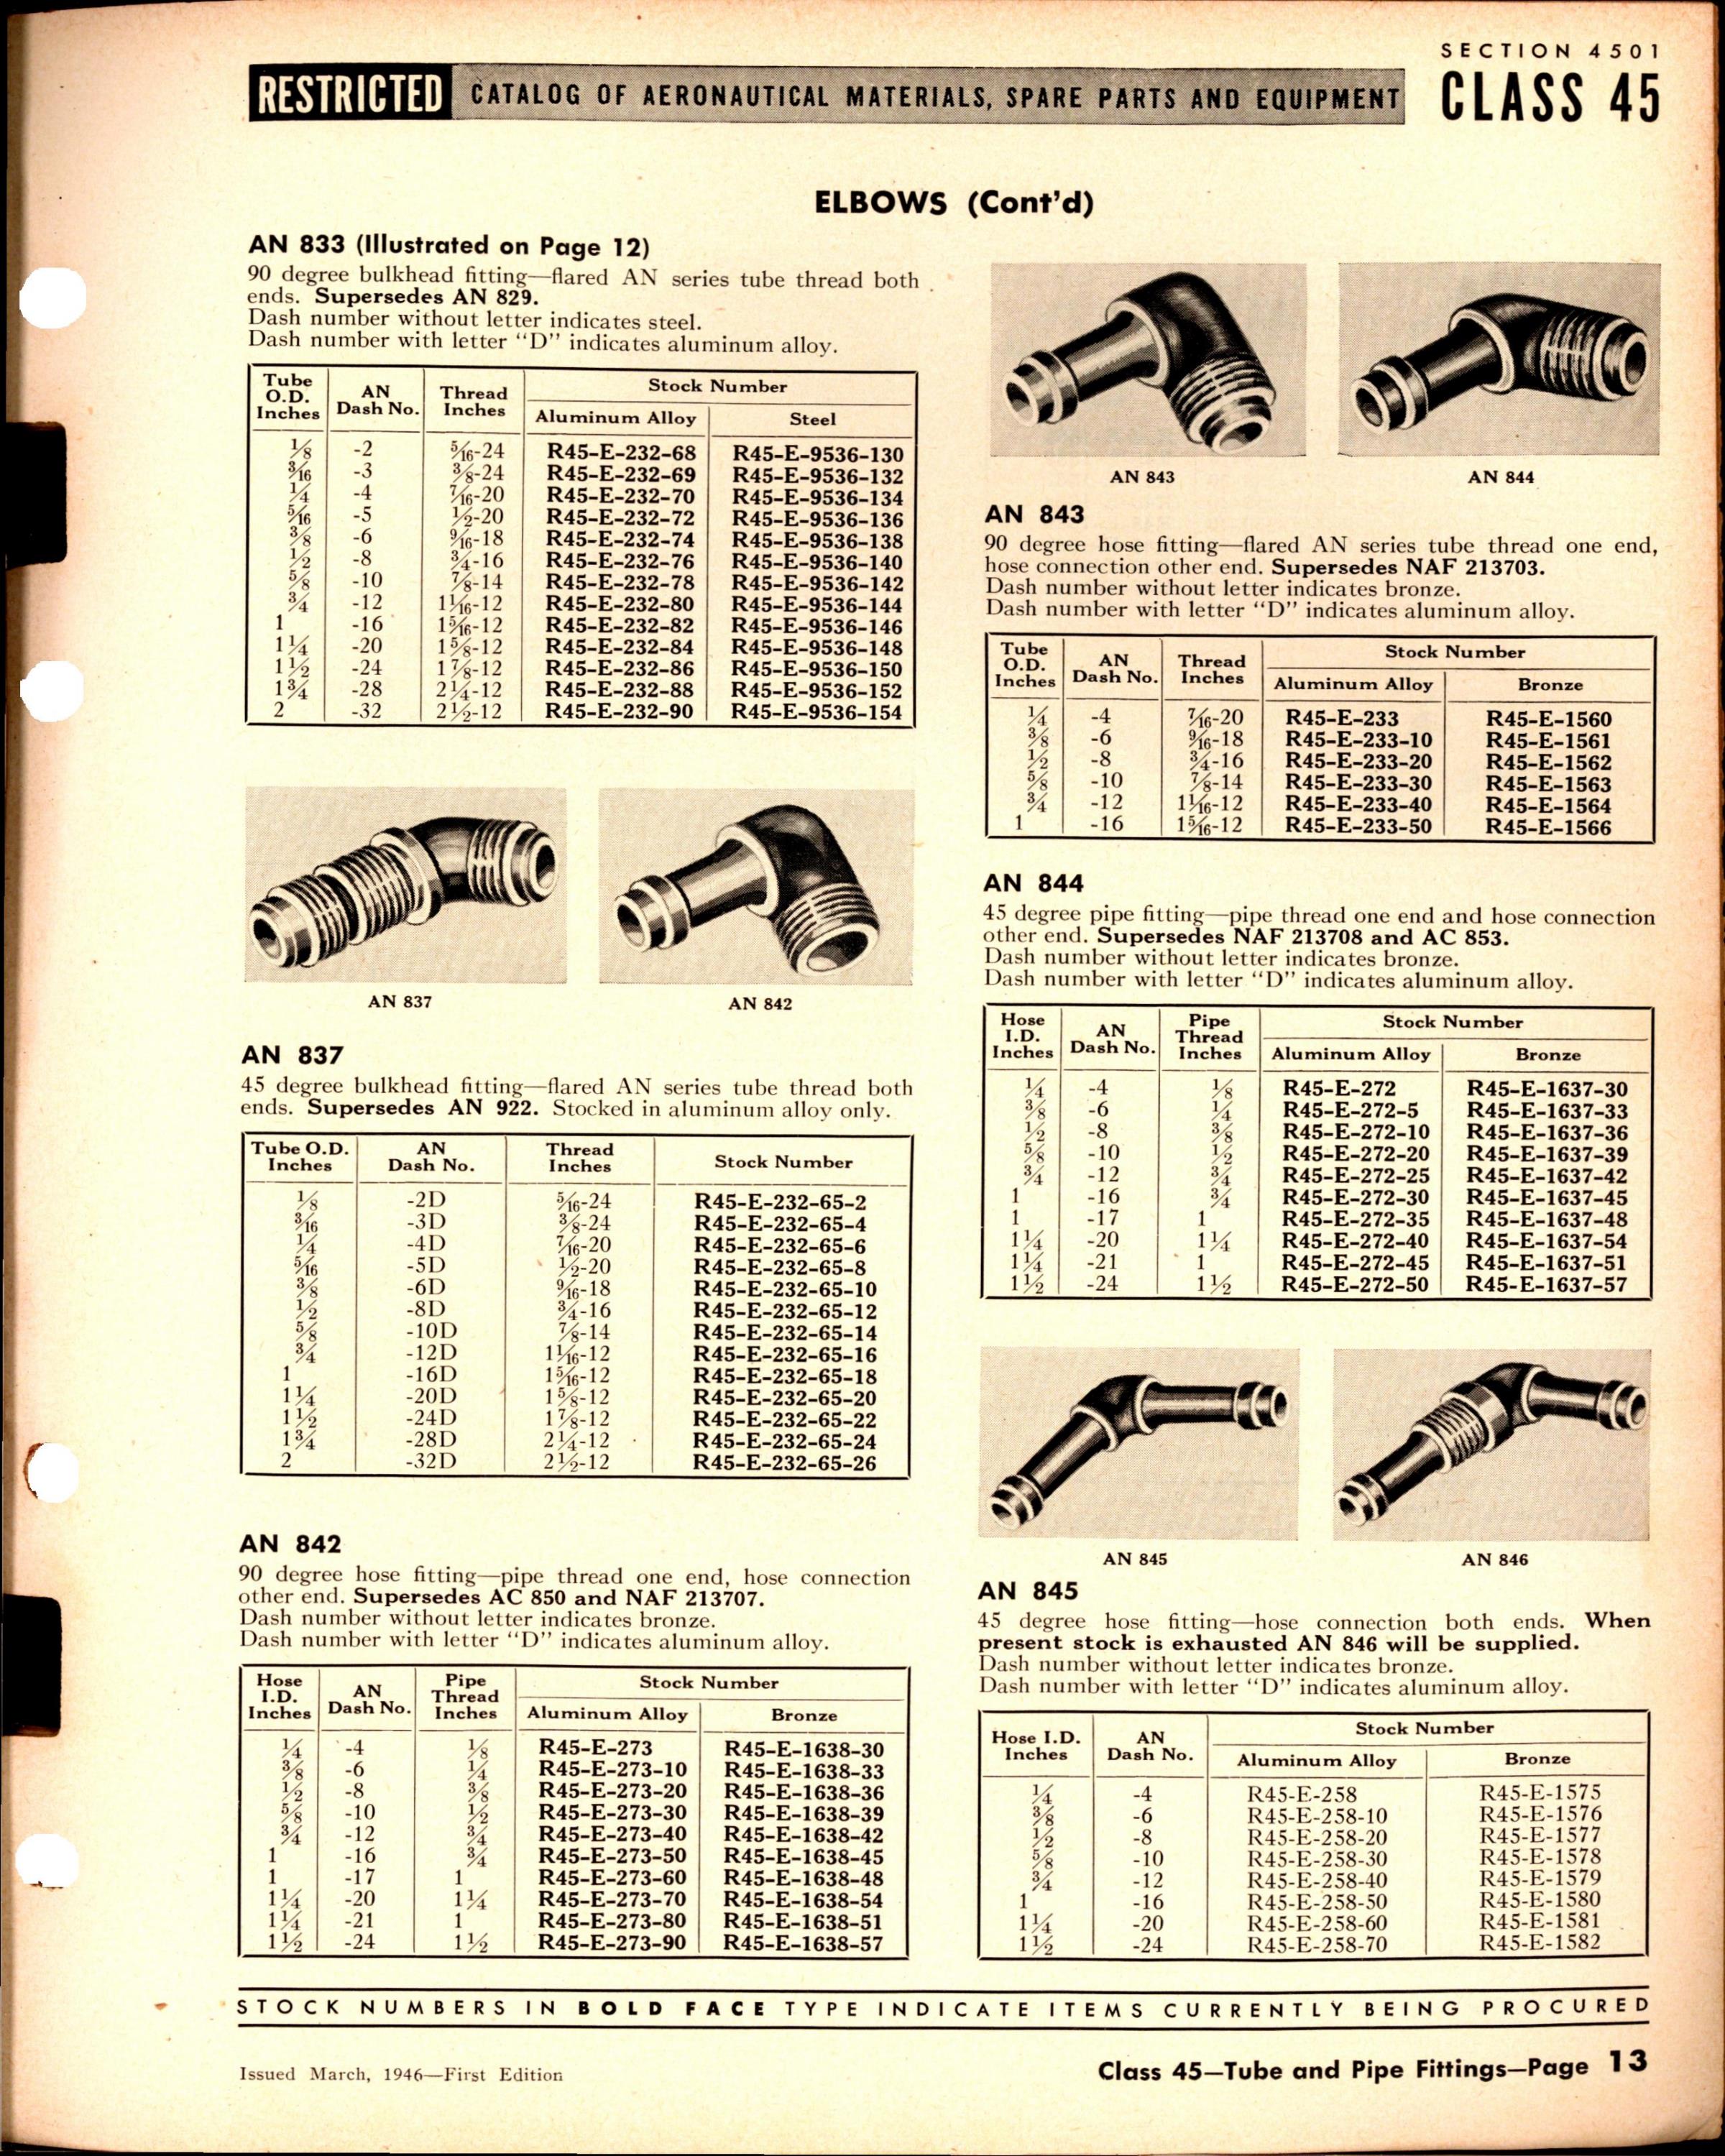 Sample page 13 from AirCorps Library document: Tube and Pipe Fittings